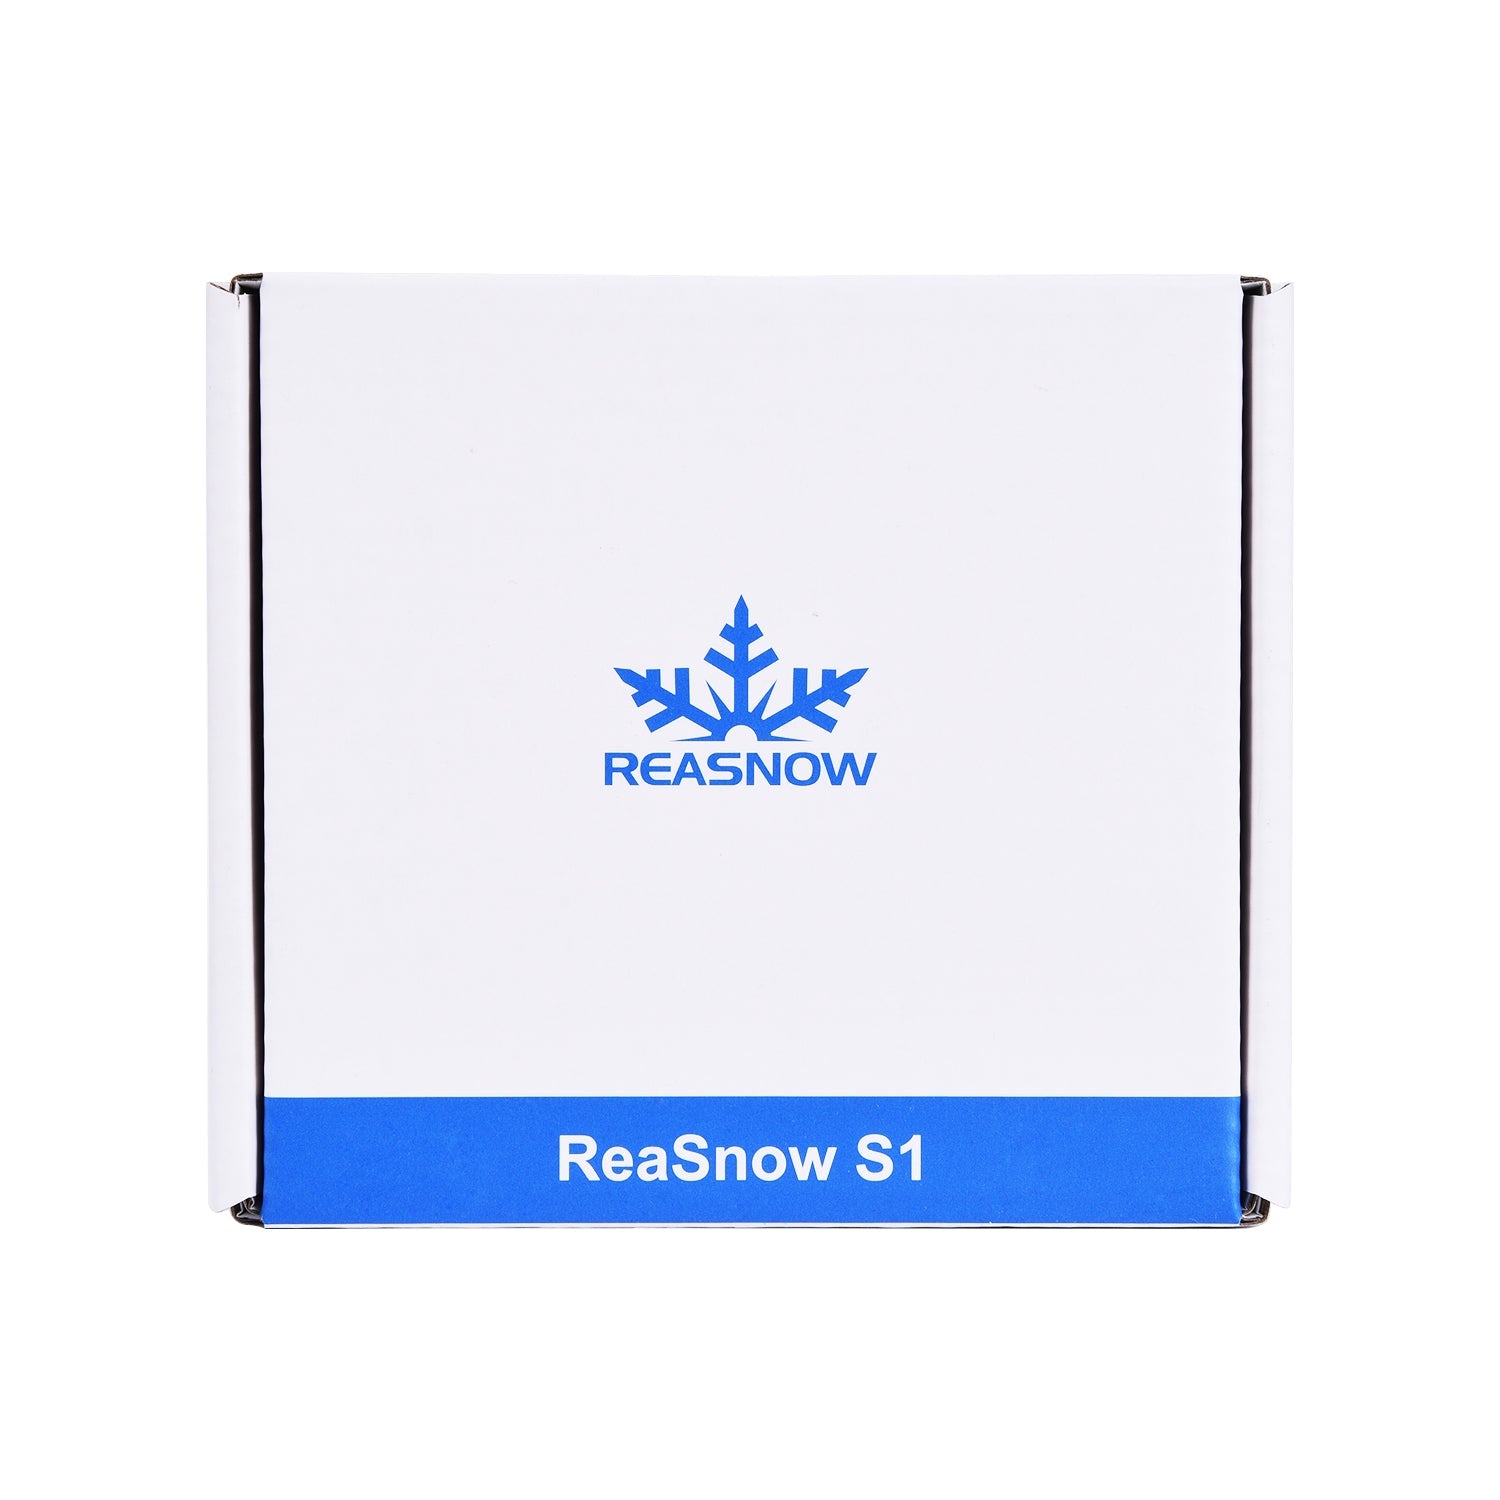 Gaming-ReaSnow S1 Converter For PS4 Pro/PS4 Slim/PS4/PS3/Xbox One X/Xbox One S/Xbox One/XBox 360/Nintendo Switch